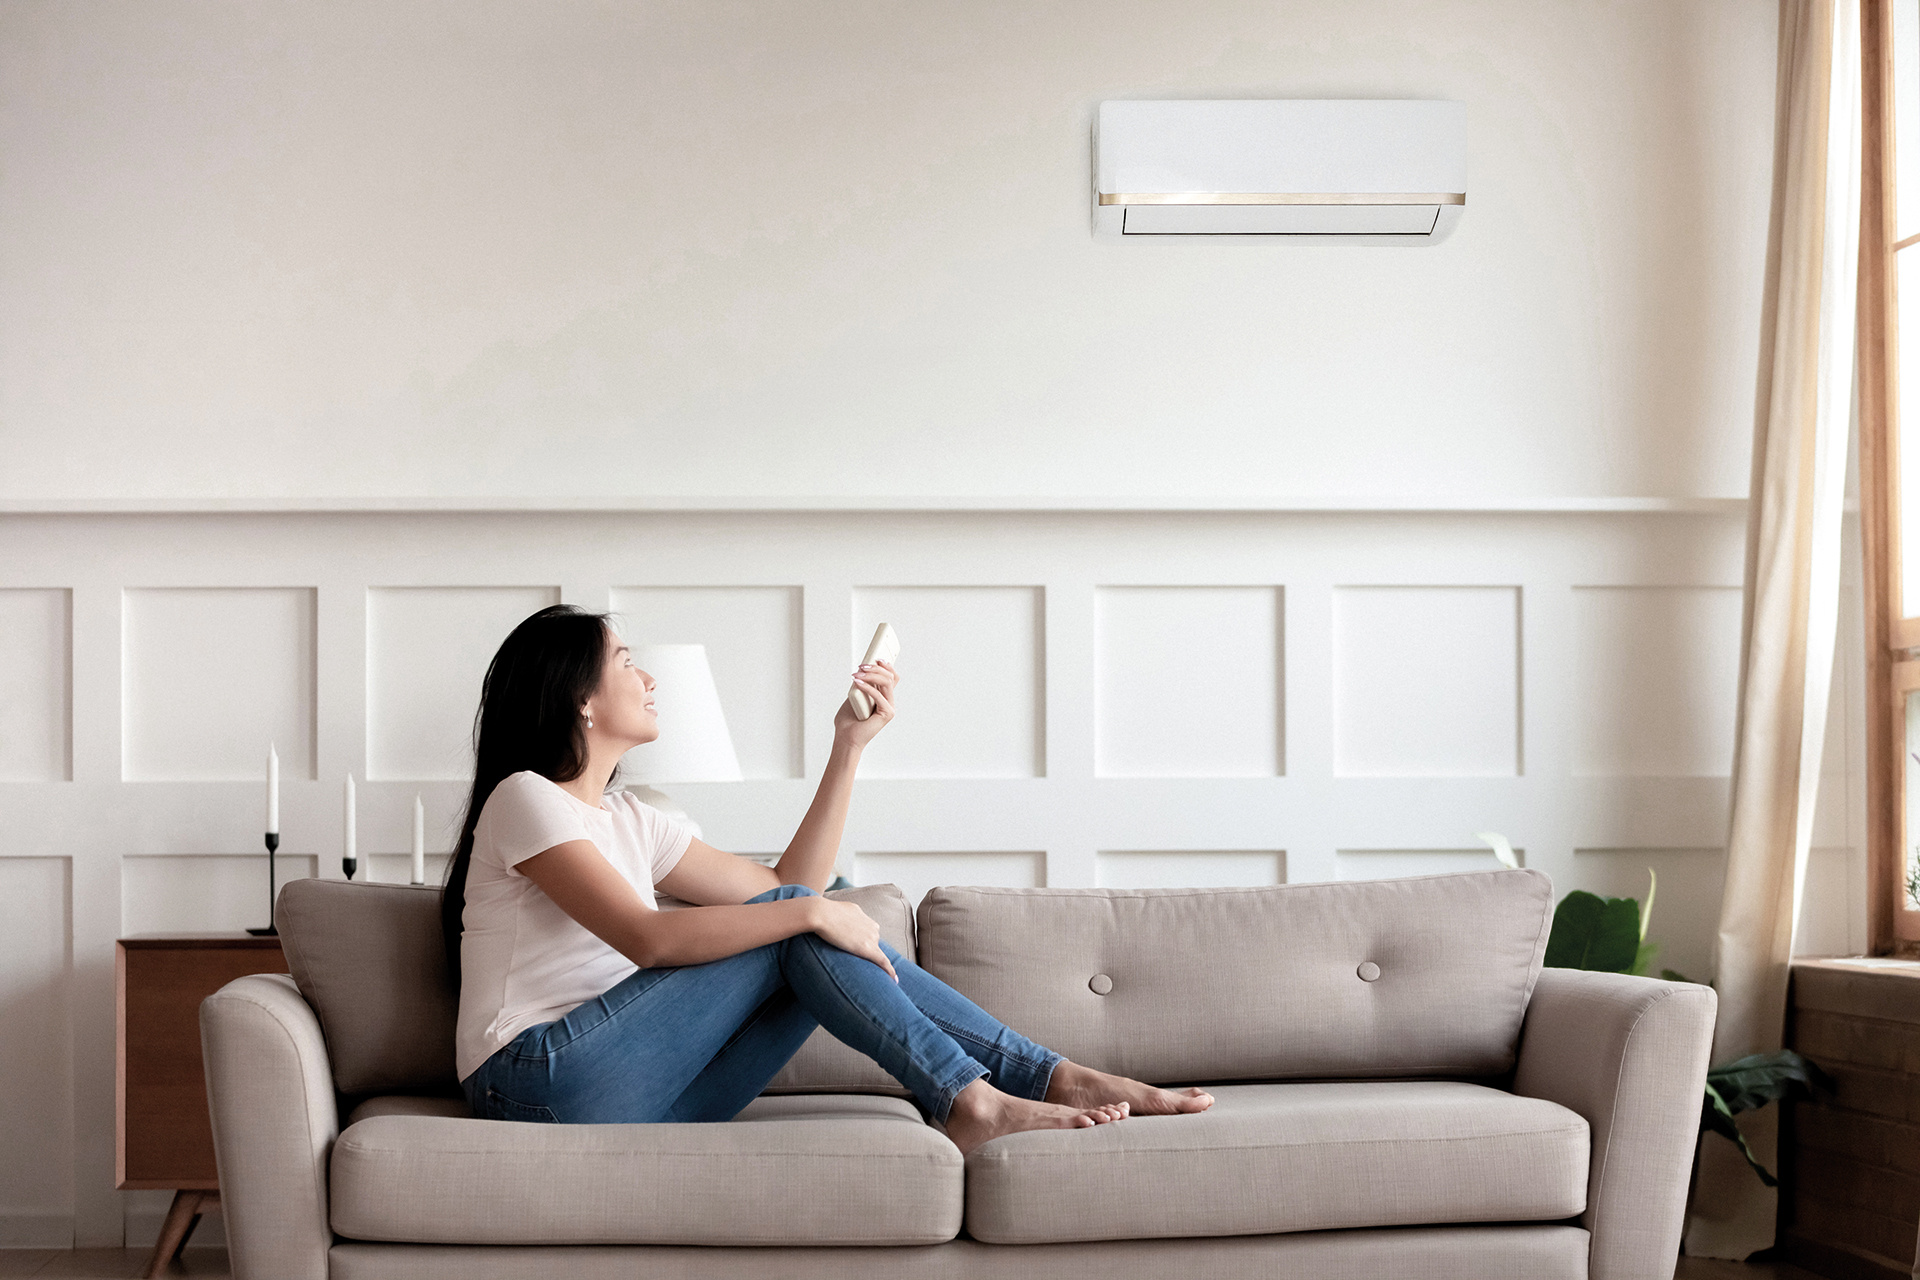 Vietnamese young woman relaxing on comfy couch in contemporary living room with air conditioner, holding remote control turning on or off cooler system, setting comfortable temperature at modern home